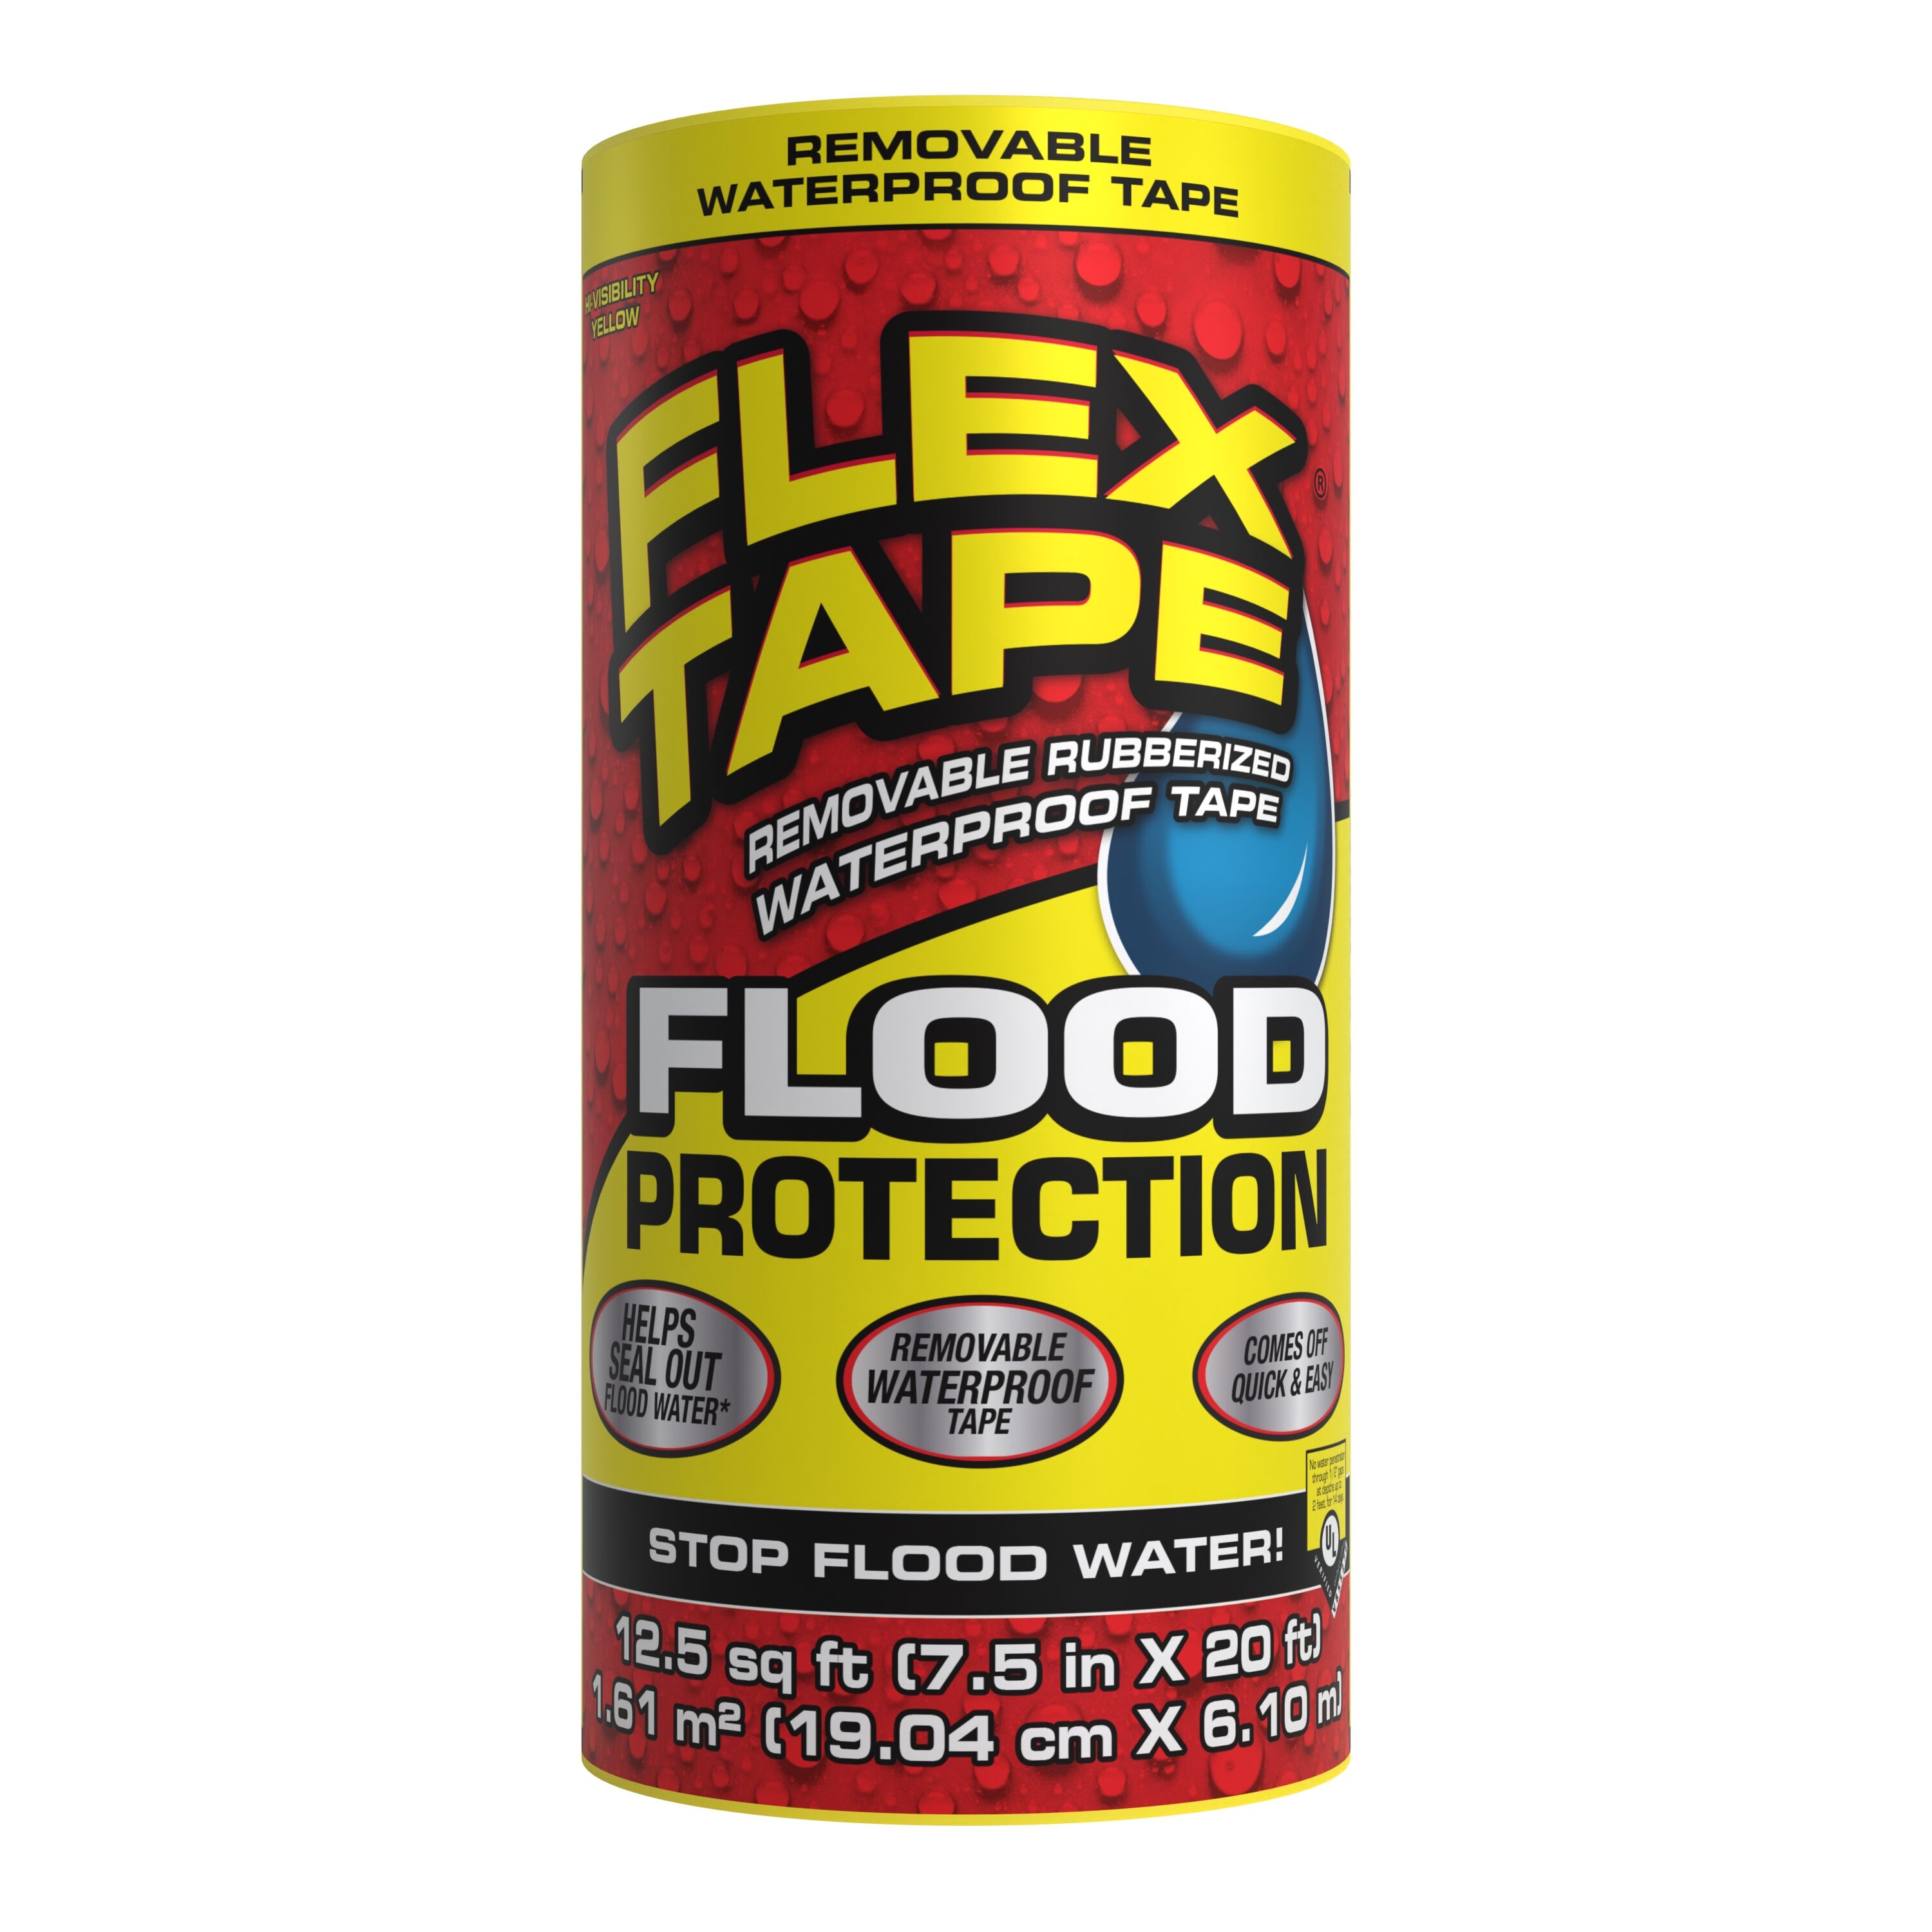 Flex Seal® Launches a High-Performance Duct Tape